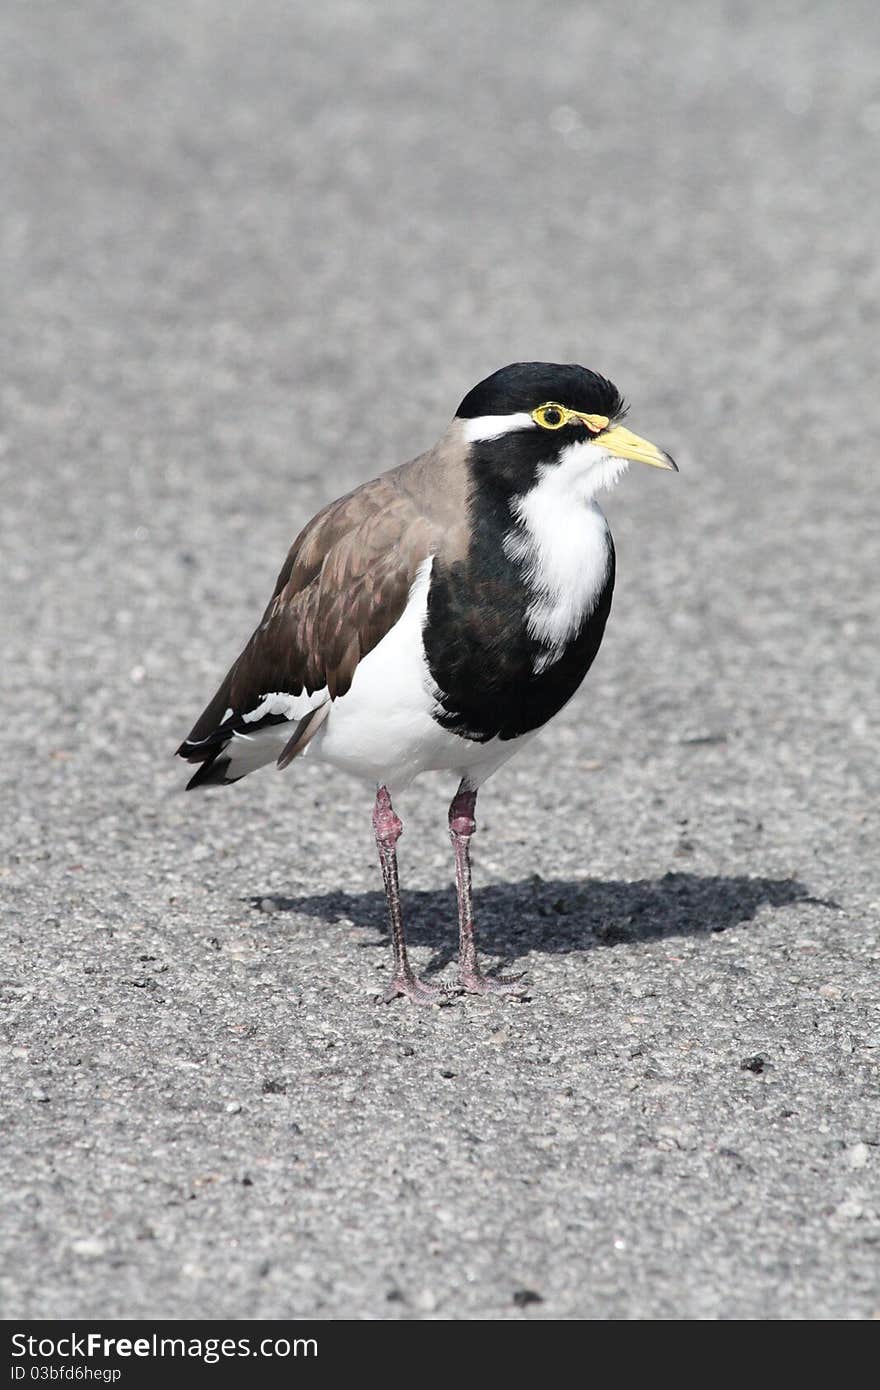 The Banded Lapwing (Vanellus tricolor) is a small to medium sized wader which belongs to the plover family. It is found over most of Australia and Tasmania though is absent from the northern third of the continent.